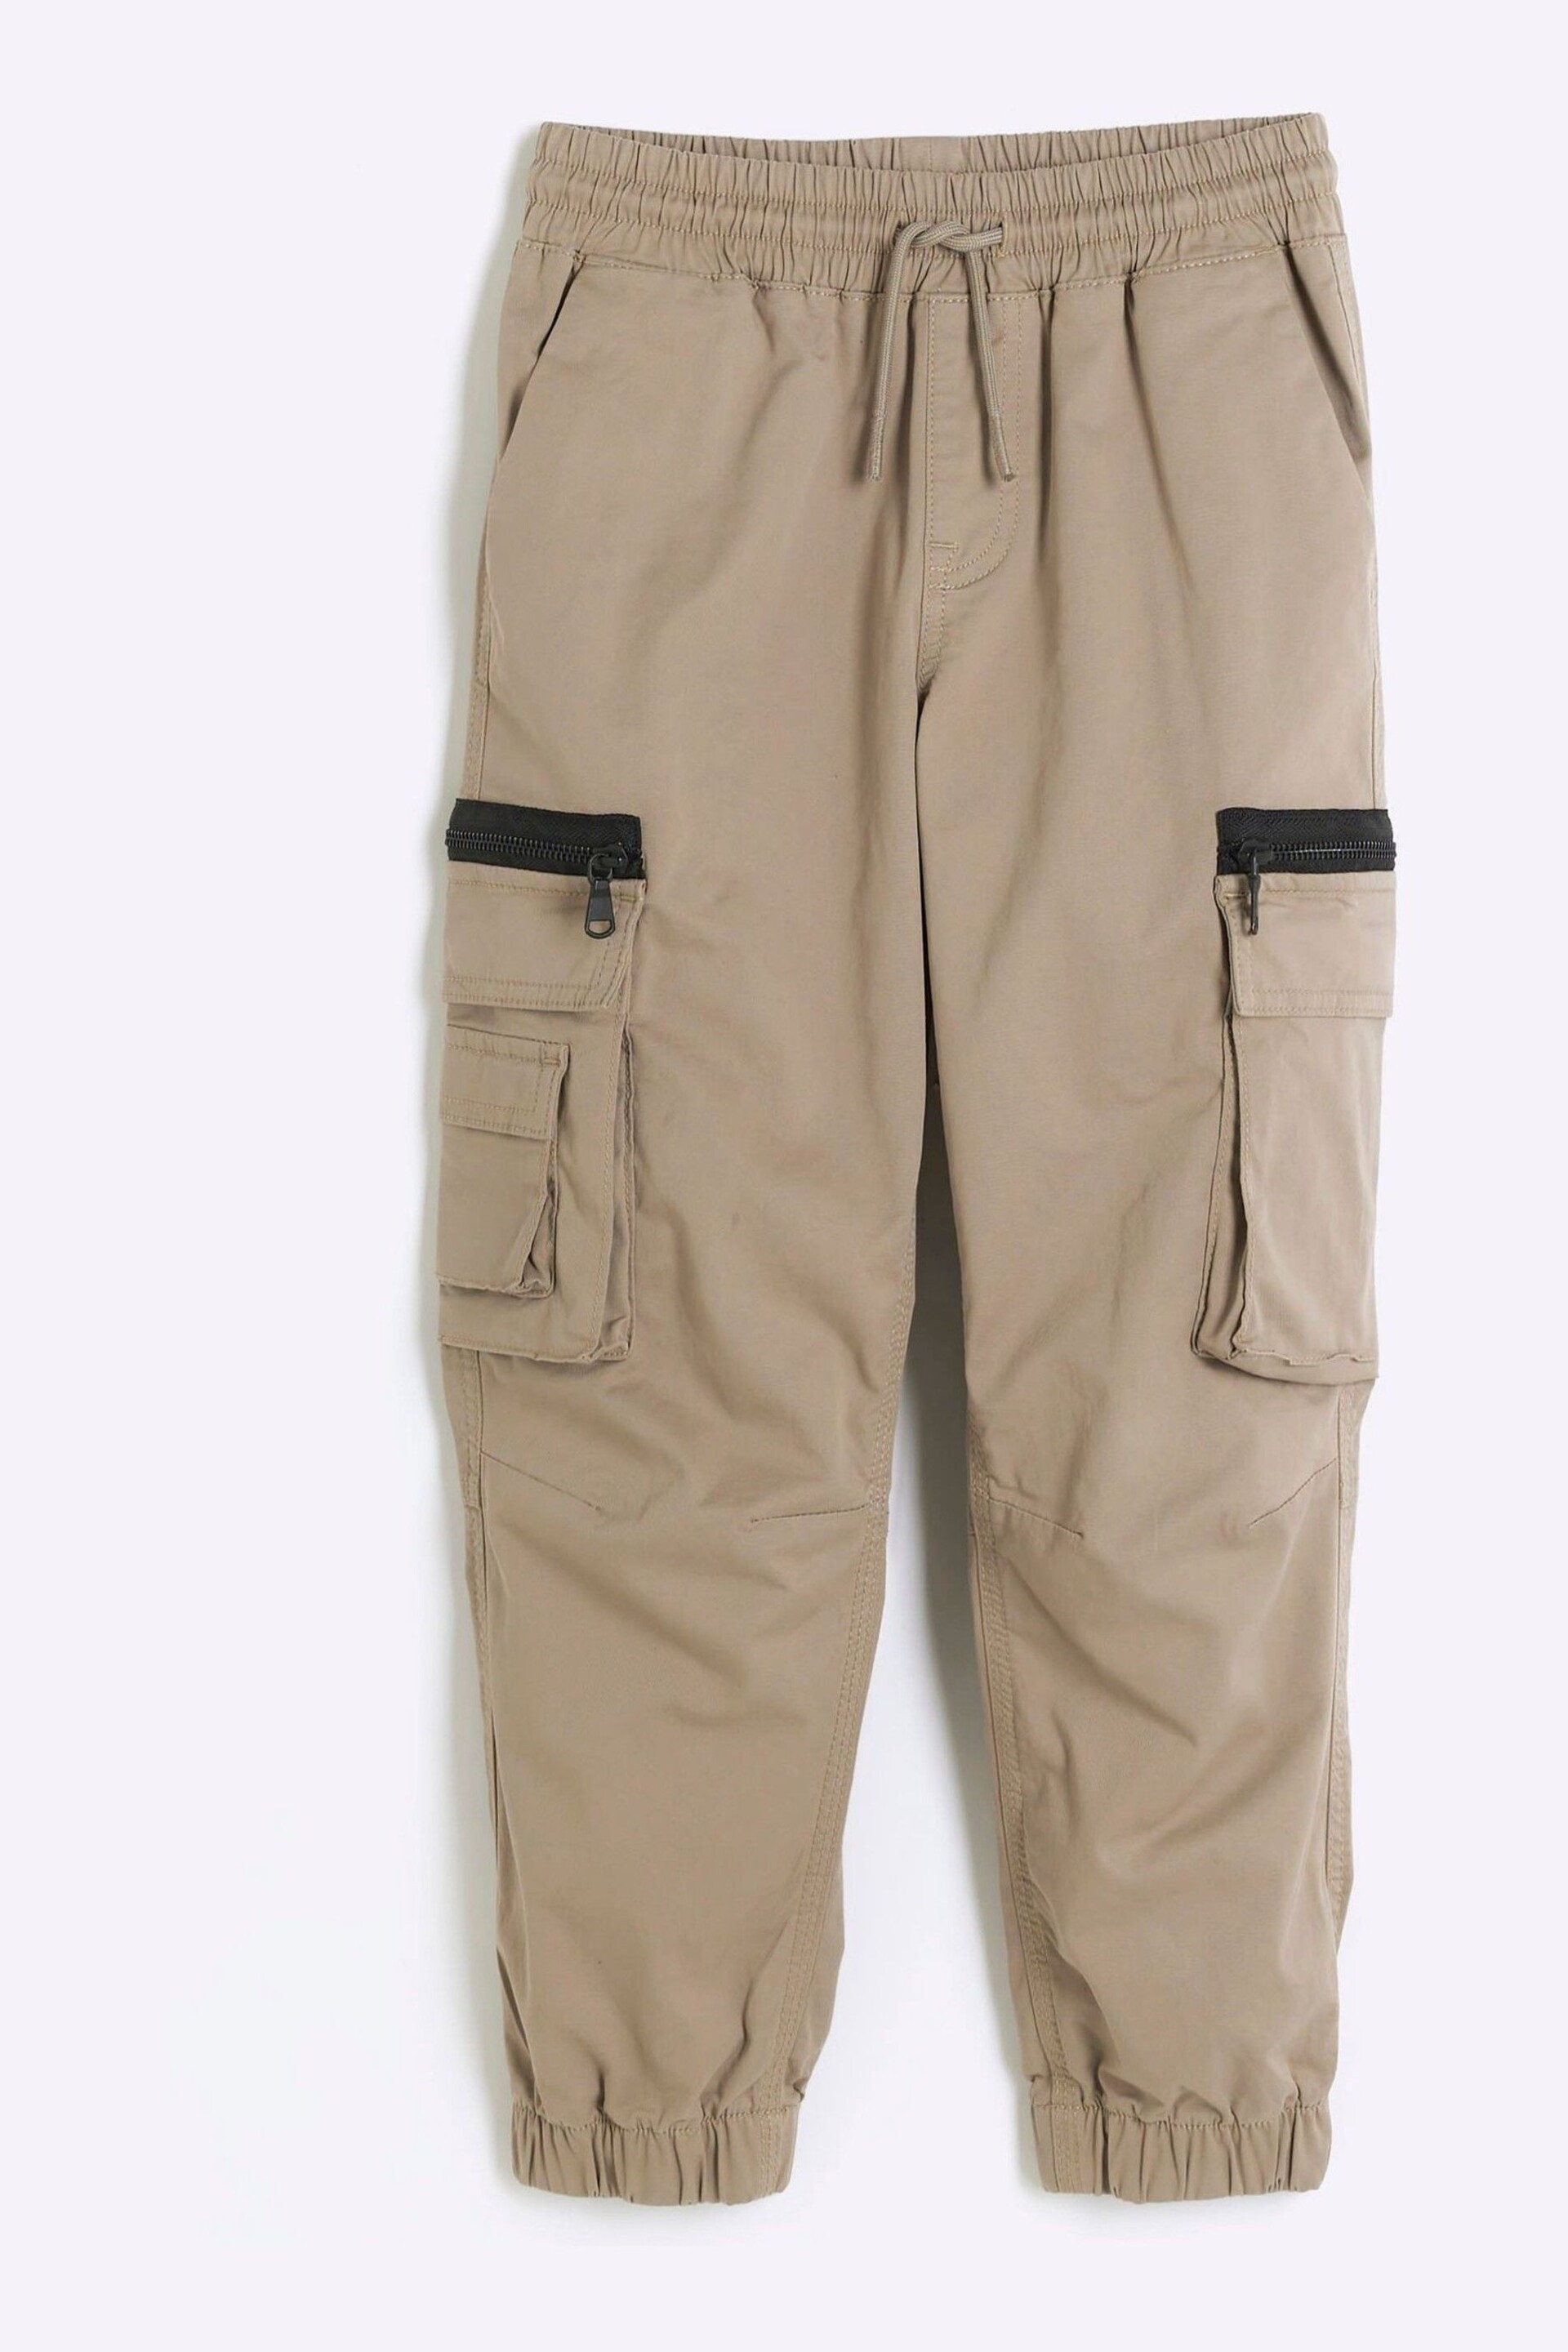 River Island Natural Boys Zip Pockets Cargo Trousers - Image 1 of 3